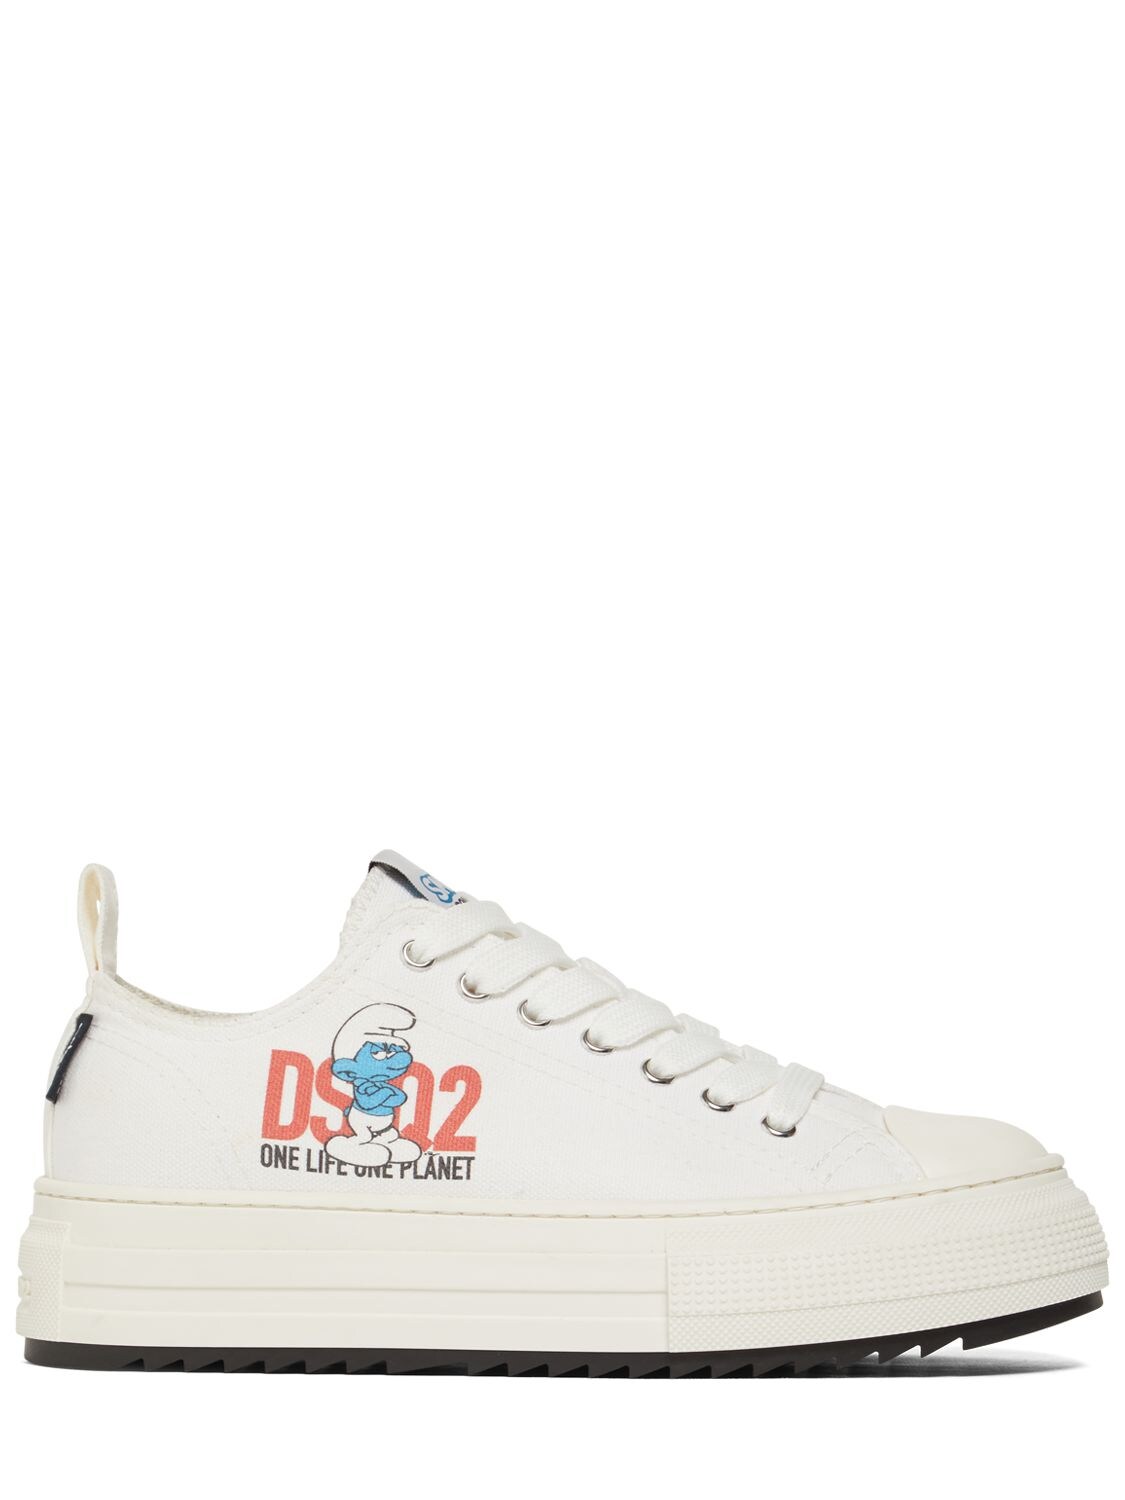 Mm Grouchy Smurfs Canvas Sneakers - DSQUARED2 - Modalova